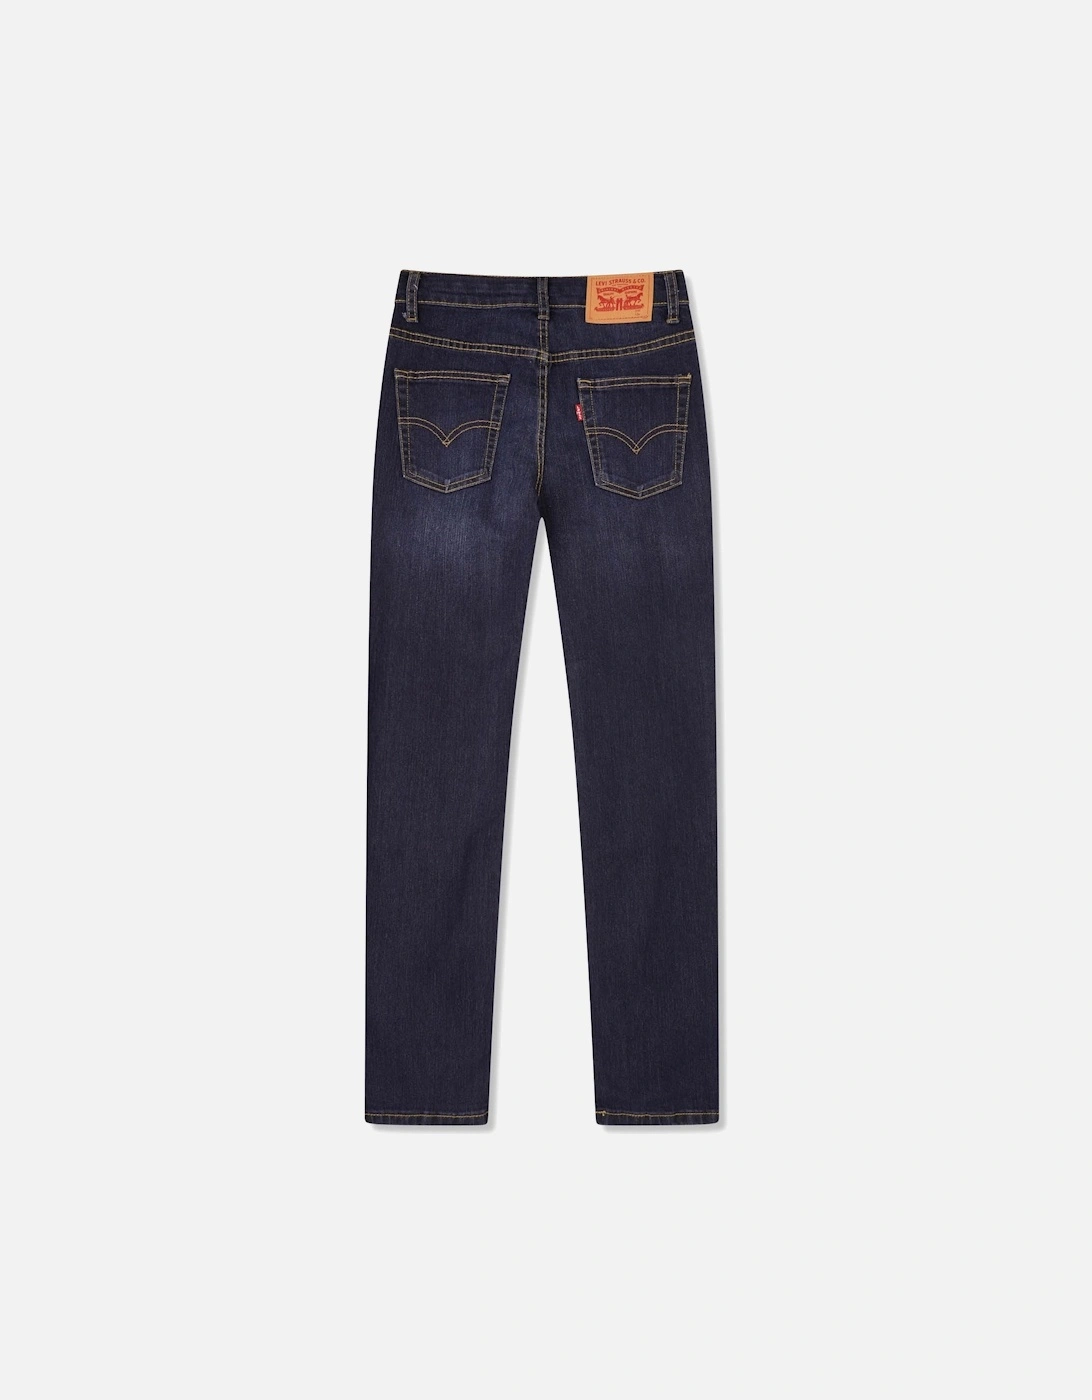 Levis Youths Rushmore 511 Jeans (Dark Blue)